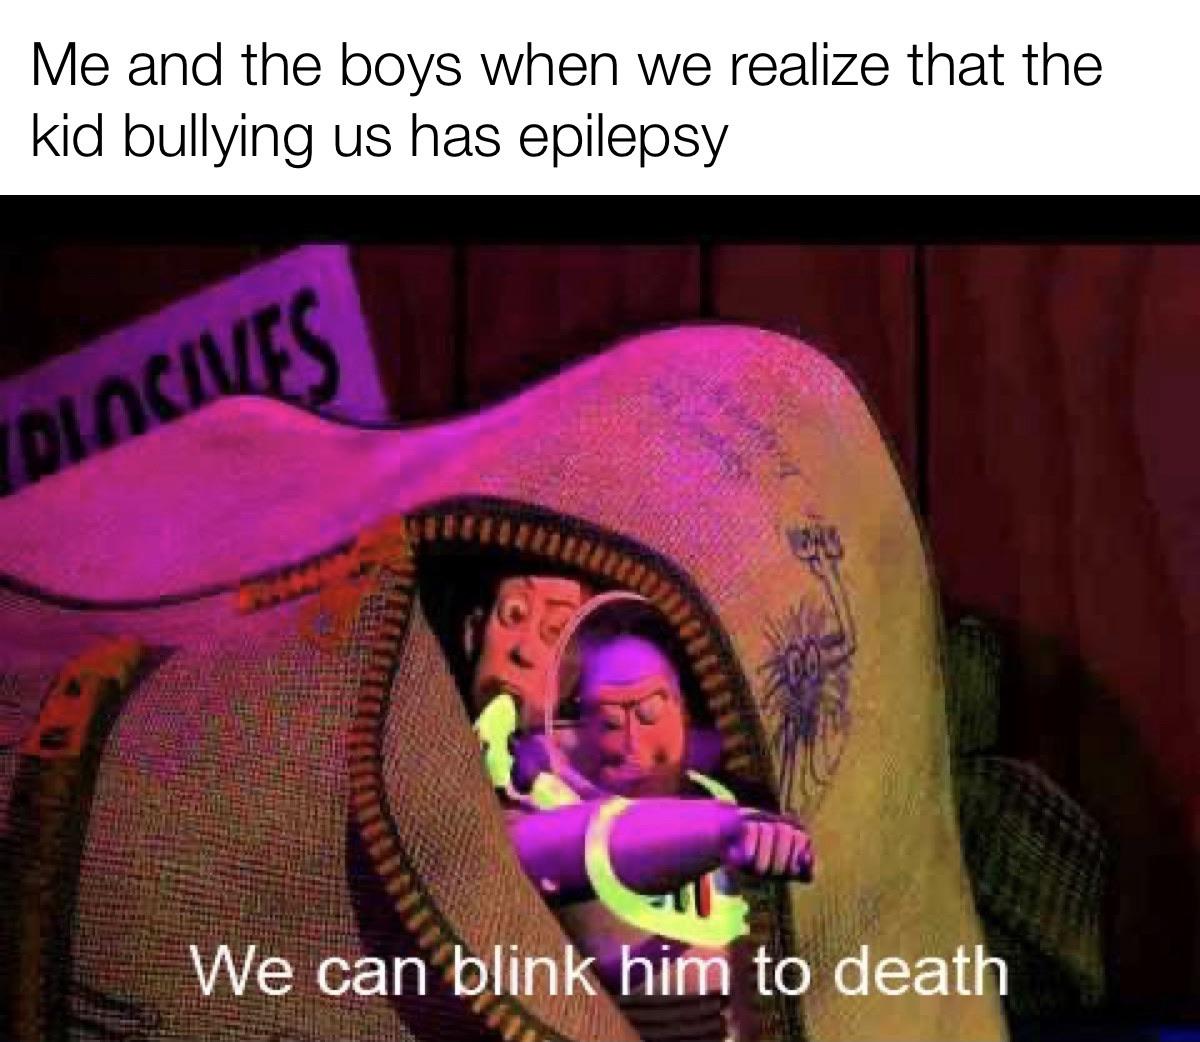 Dank, Woody, Died Dank Memes Dank, Woody, Died text: Me and the boys when we realize that the kid bullying us has epilepsy We can blin him to death 